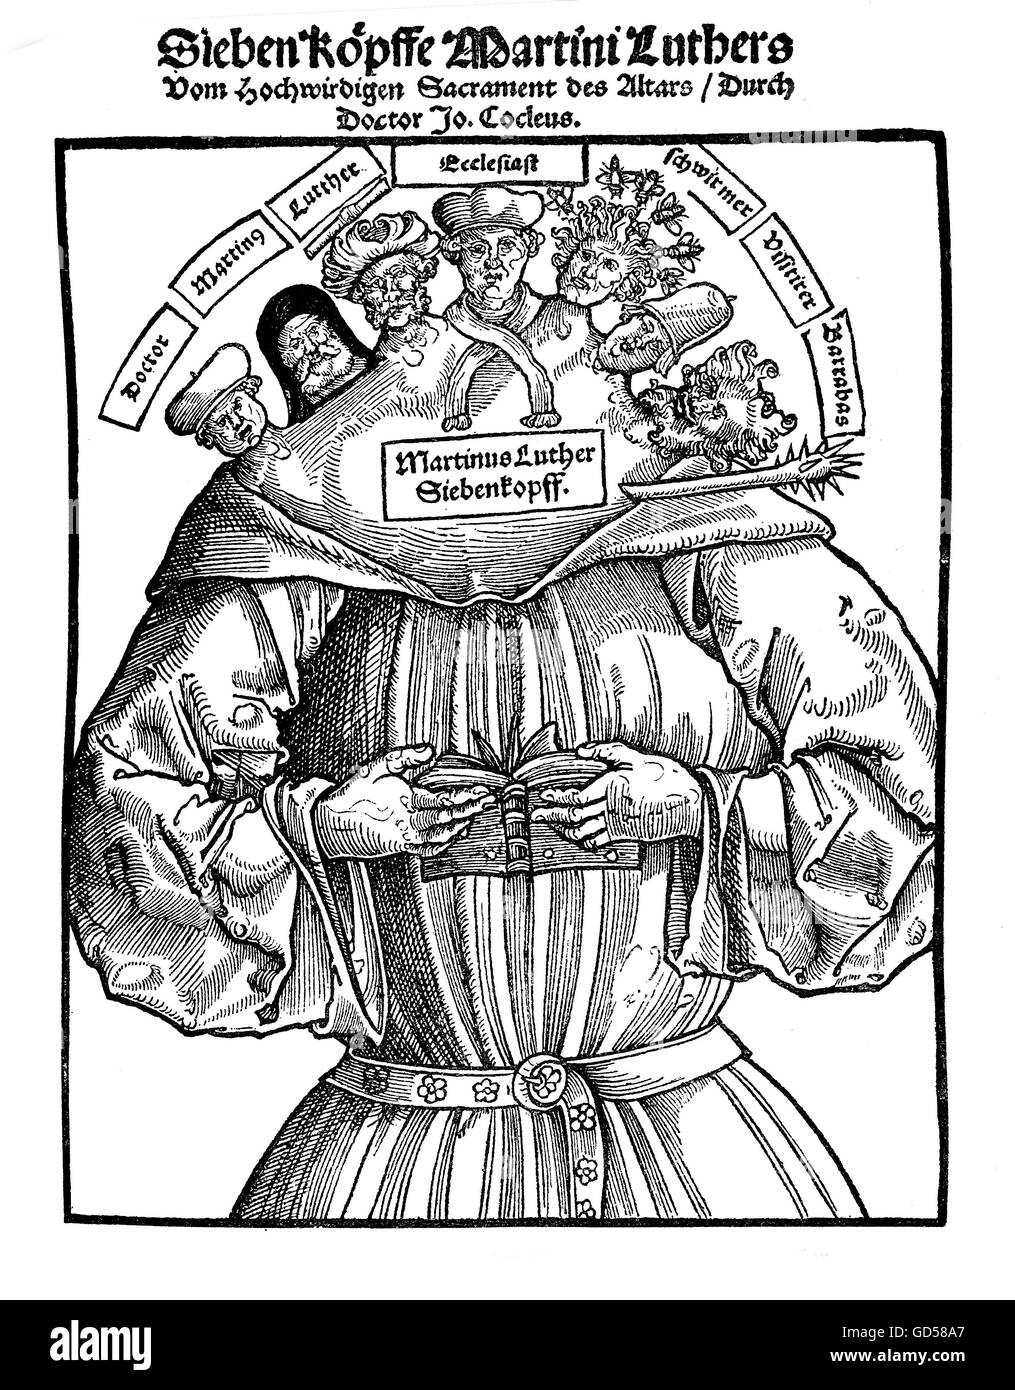 The 7 heads of Martin Luther are captioned, left to right 'Doctor, Martin, Luther, Ecclesiast, Vagabond, Pfister (Backer?), Barabbas'. The satire purportedly hiding behind these words looks rather cryptic. XVI century. Stock Photo